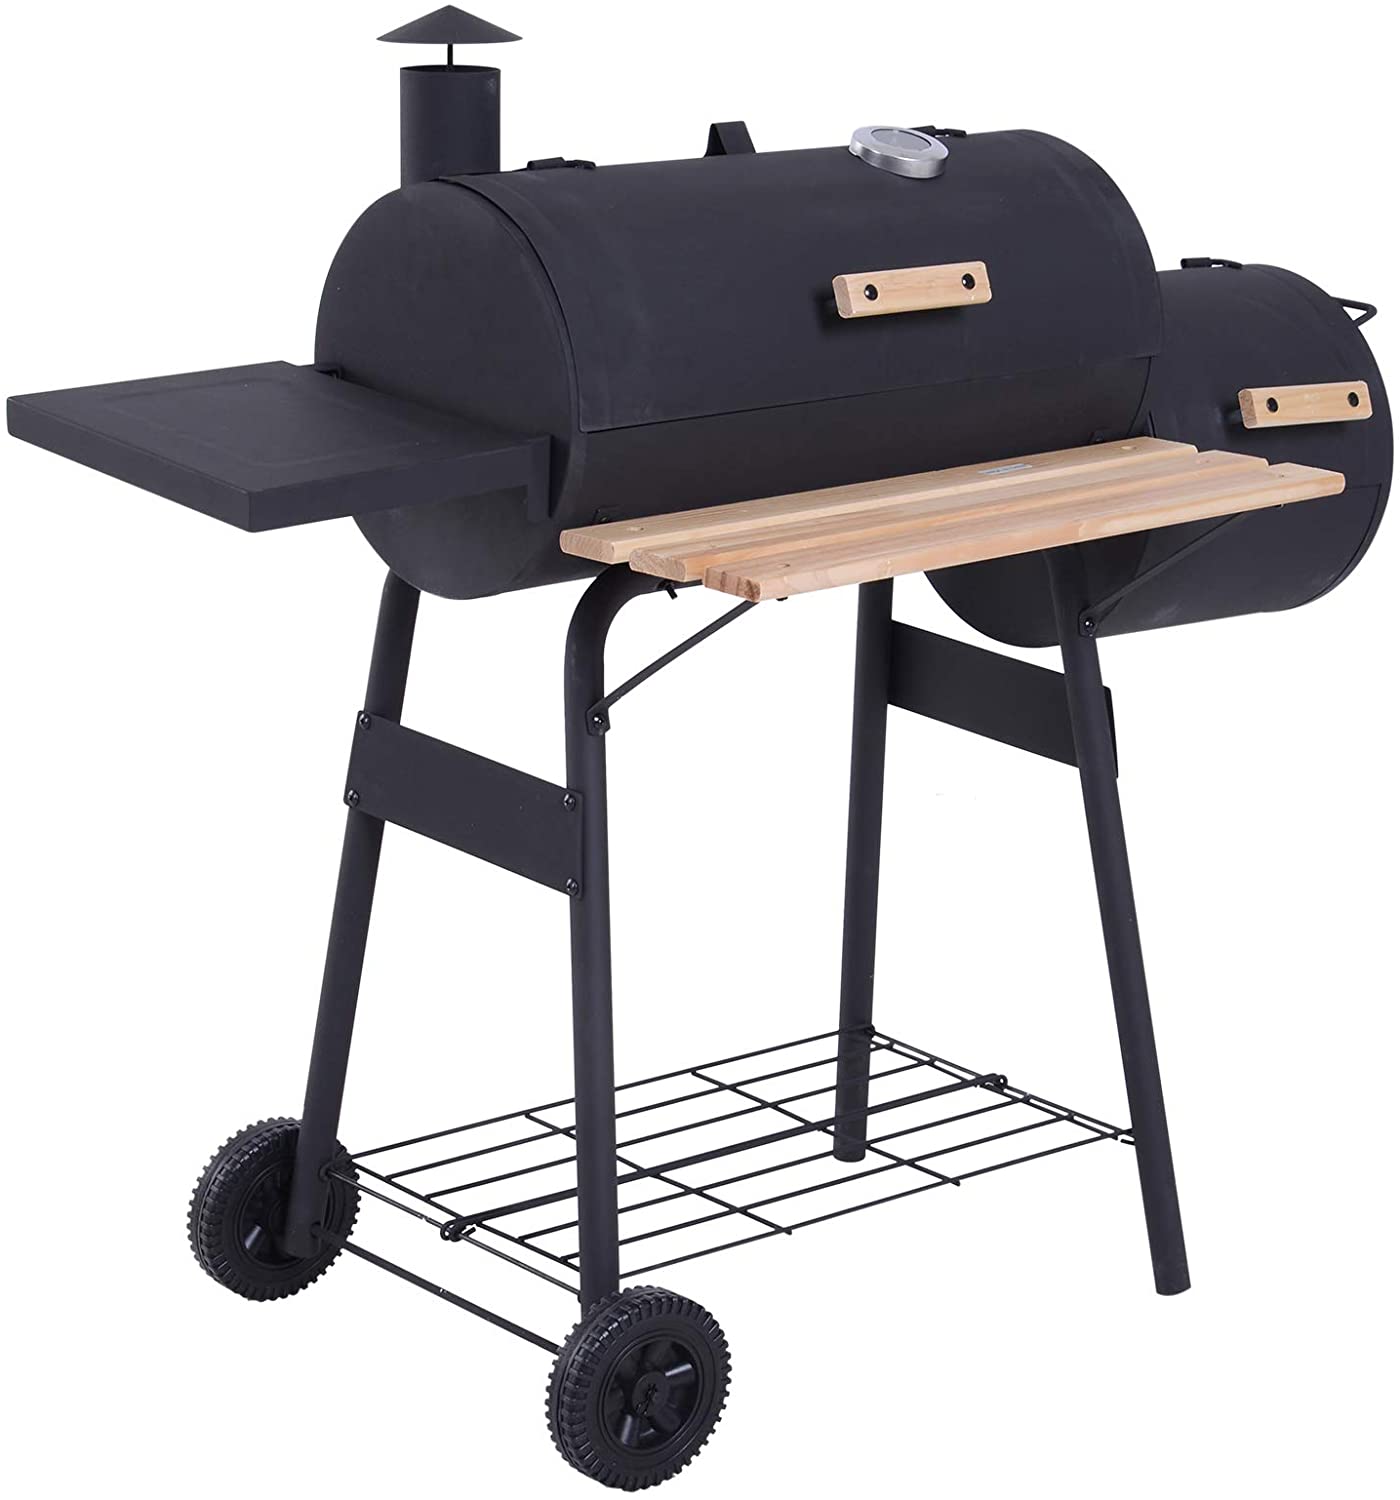 Outsunny Steel Portable BBQ Grill